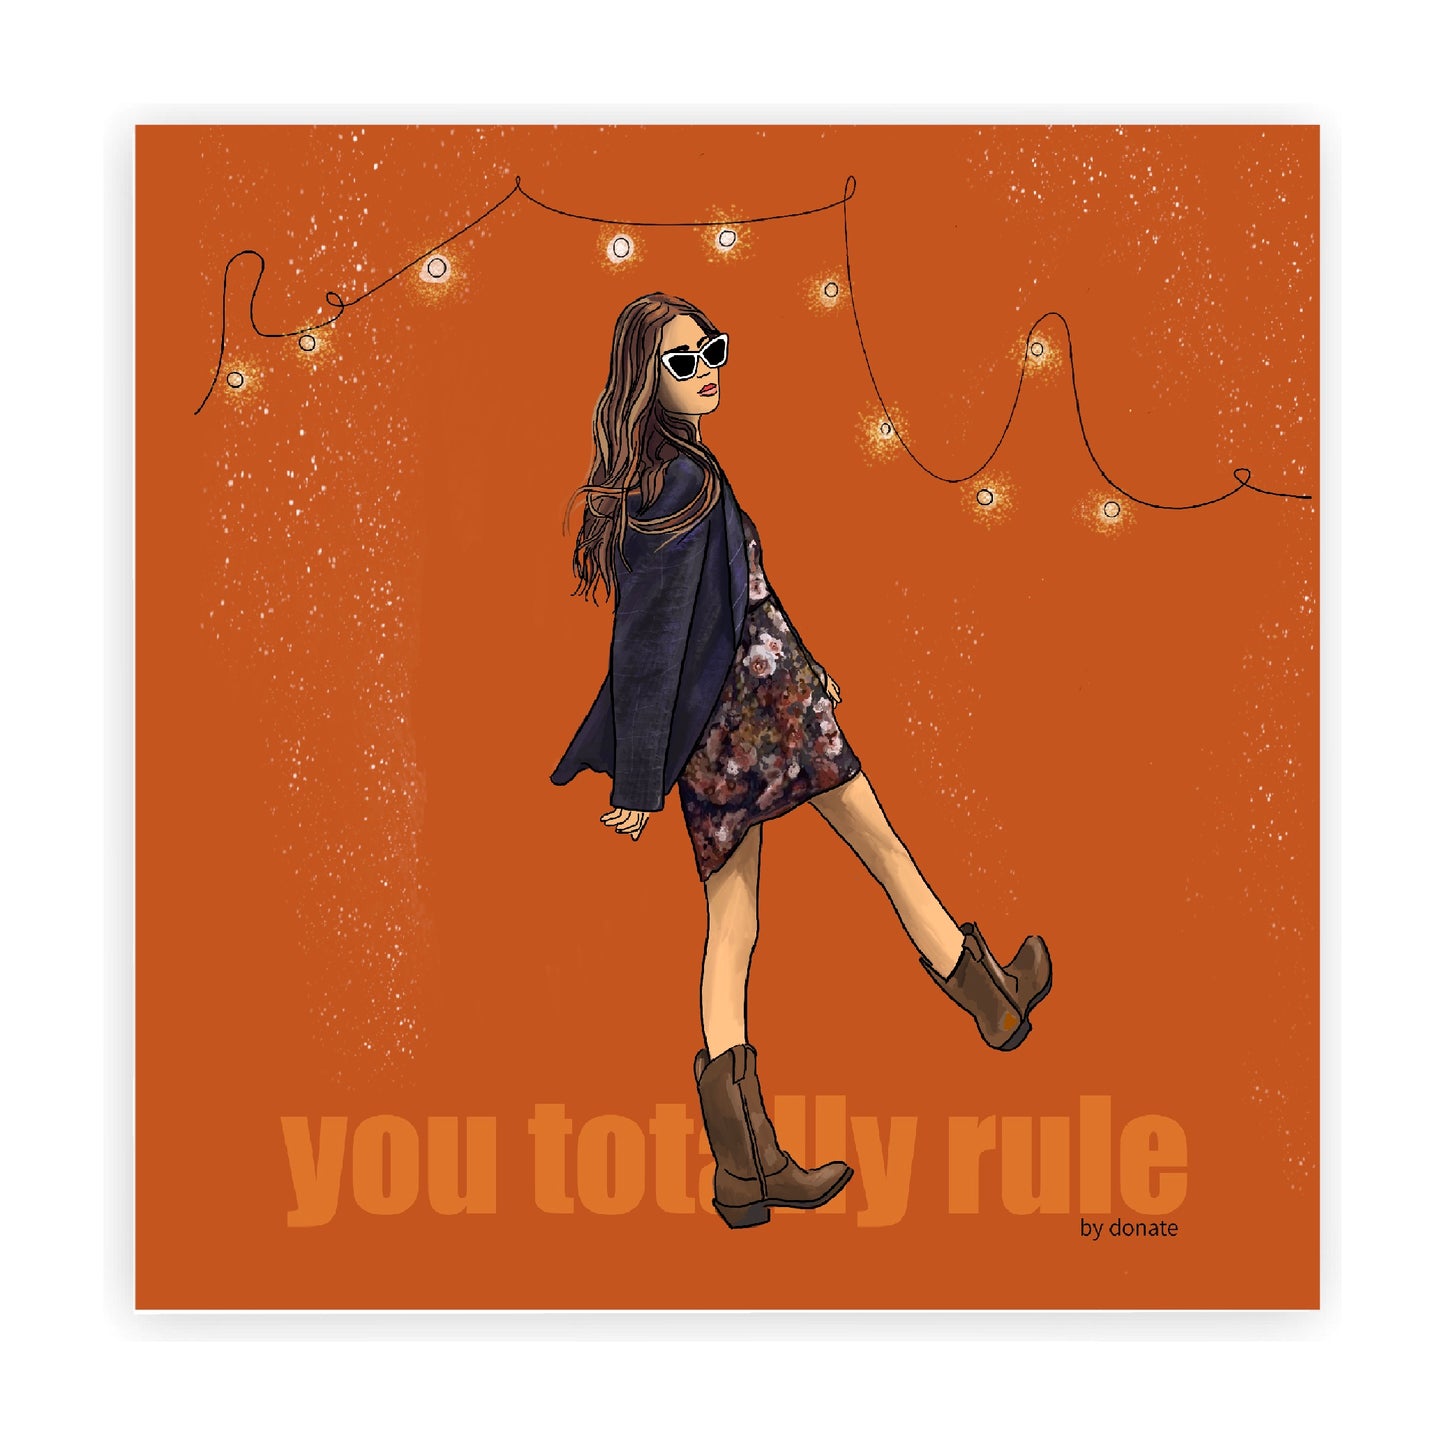 You totally rule (15x15cm)